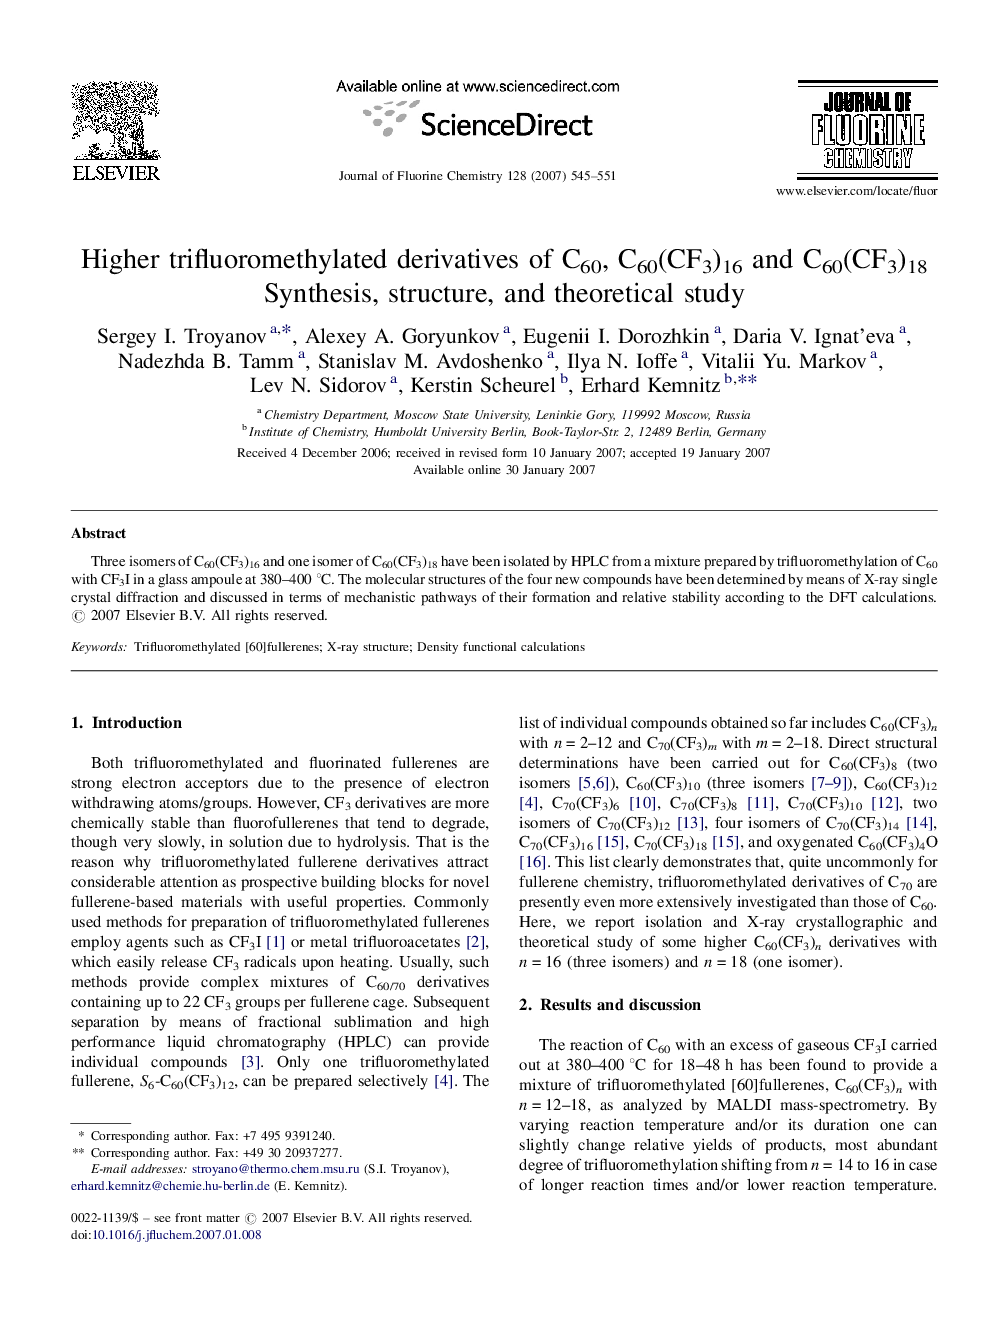 Higher trifluoromethylated derivatives of C60, C60(CF3)16 and C60(CF3)18